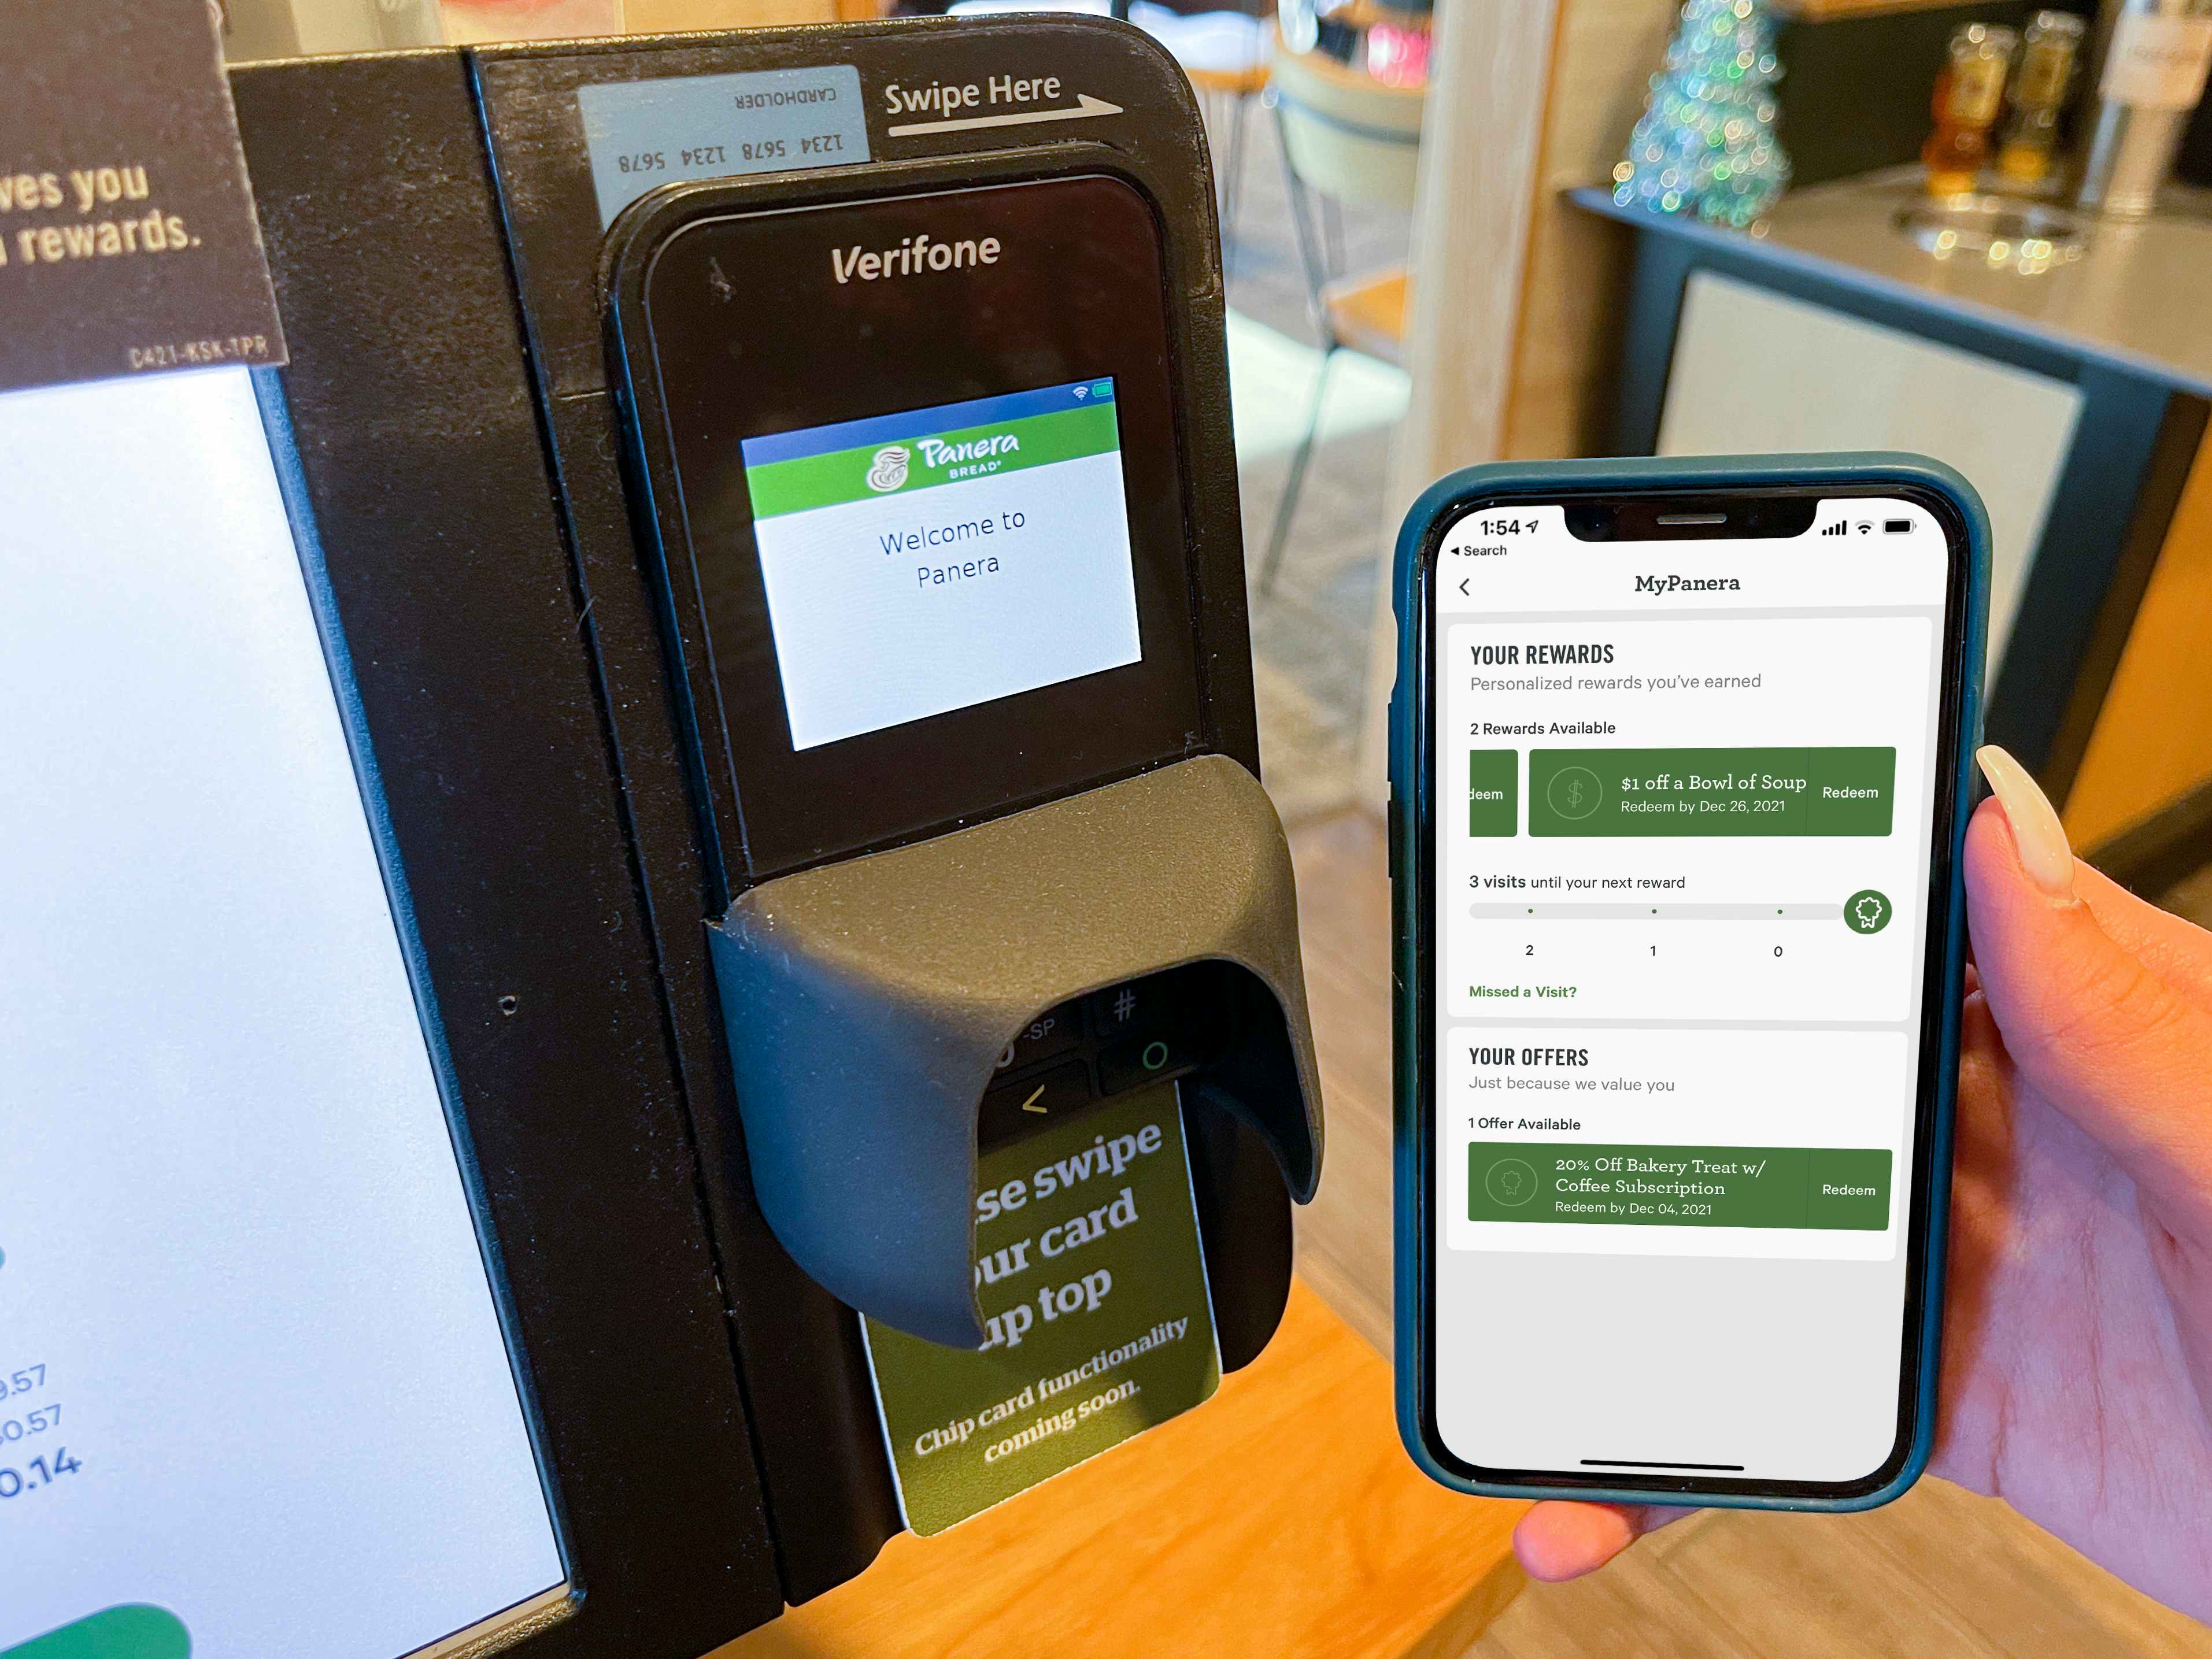 A phone held next to a self checkout kiosk displaying rewards.